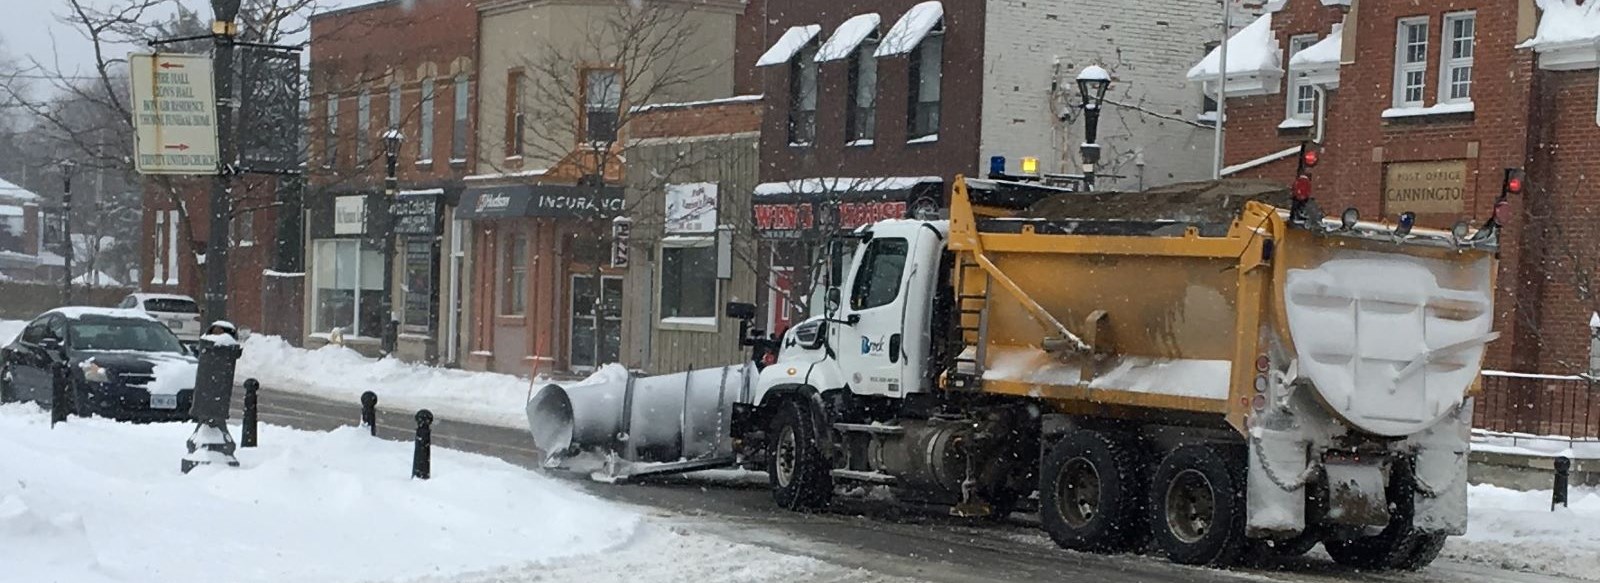 snow plow clearing snow from streets